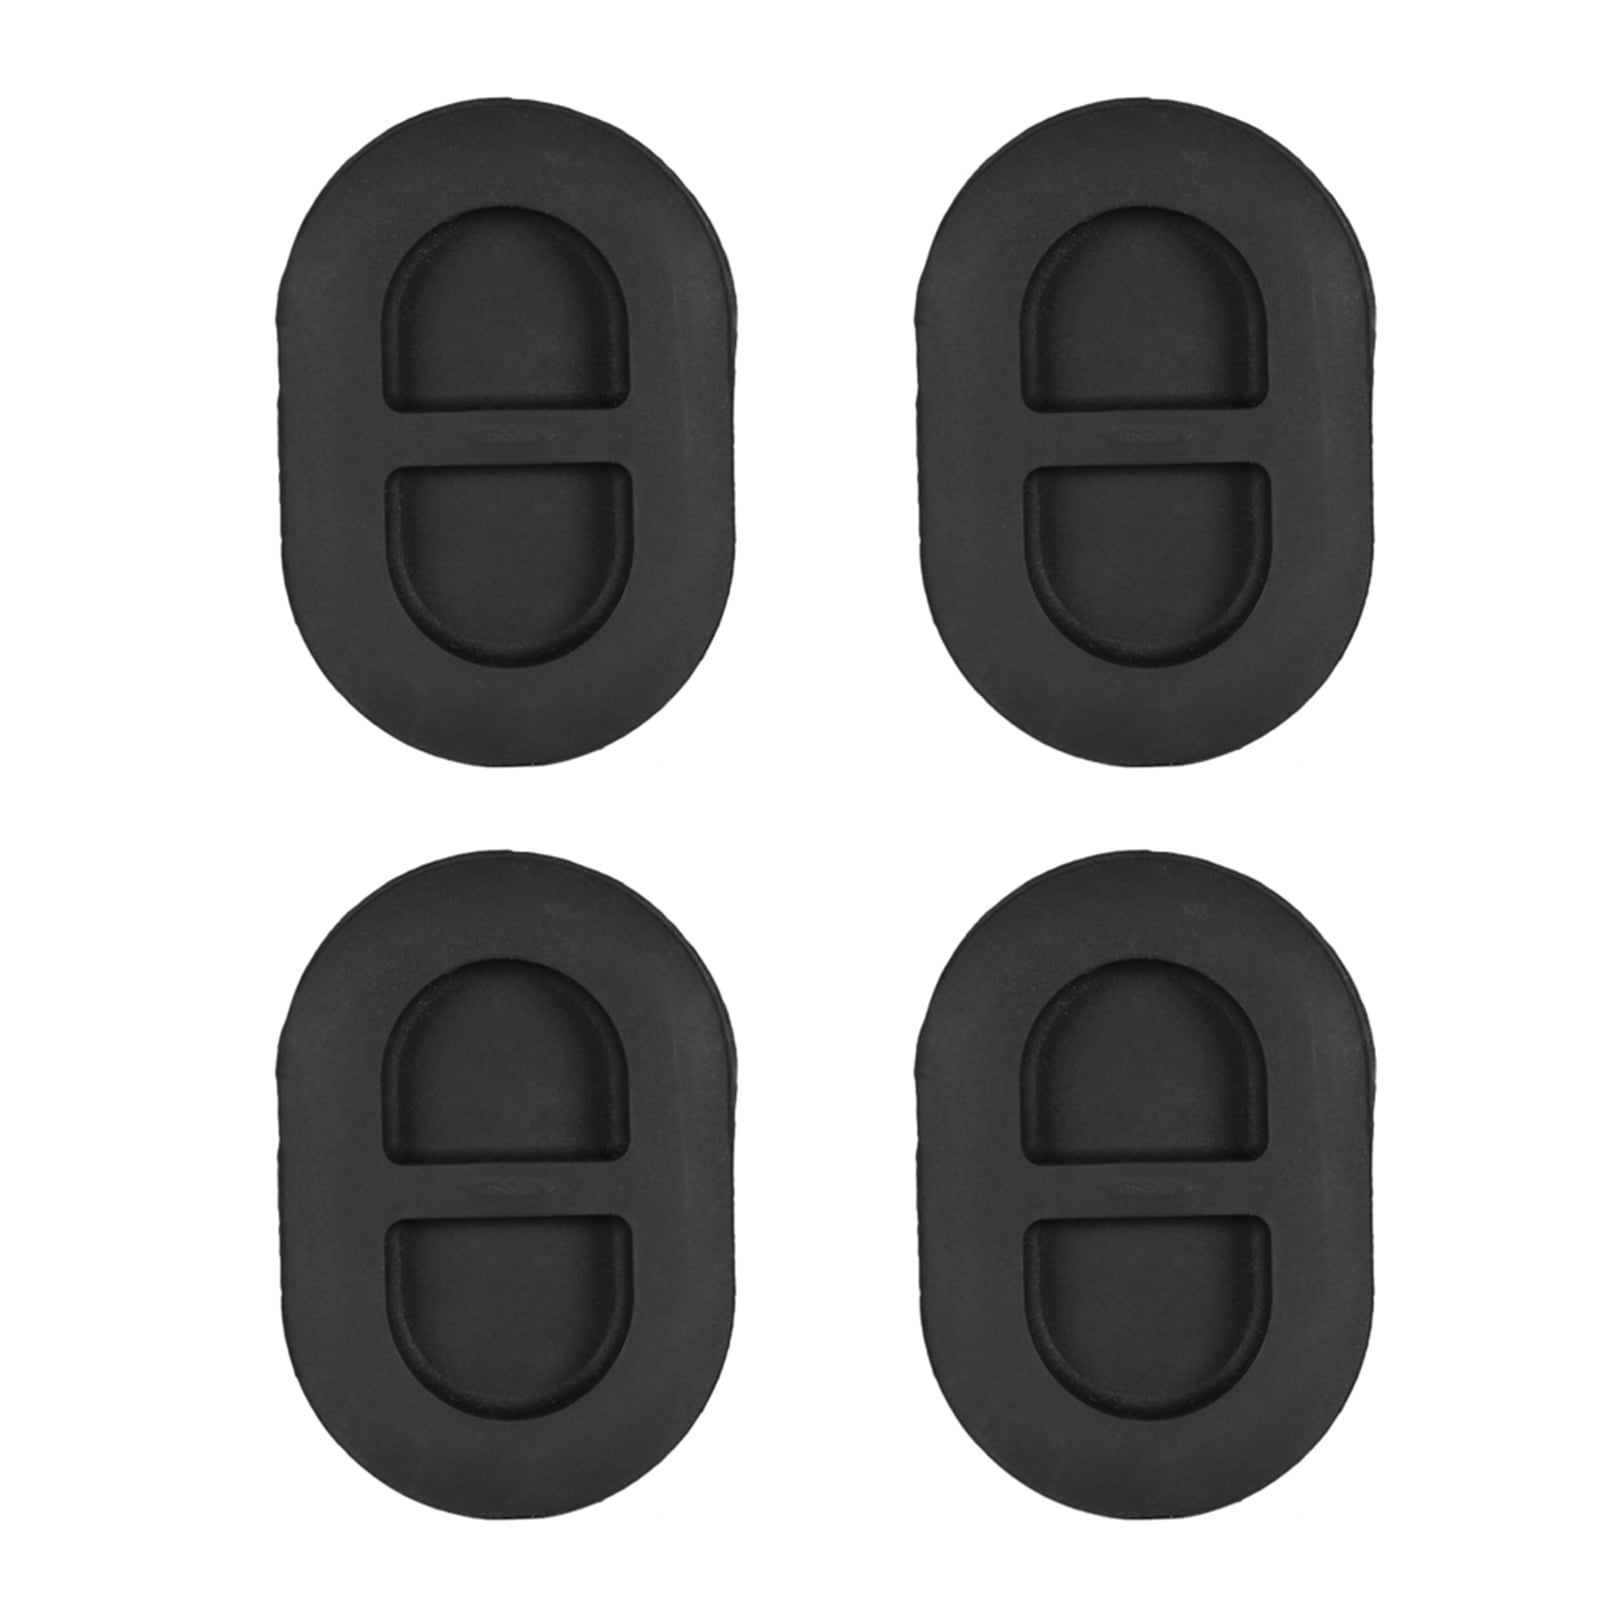 4Pcs Oval Rubber Floor Pan Plugs Drain Hole Cover Fit For Jeep Wrangler JK JL 